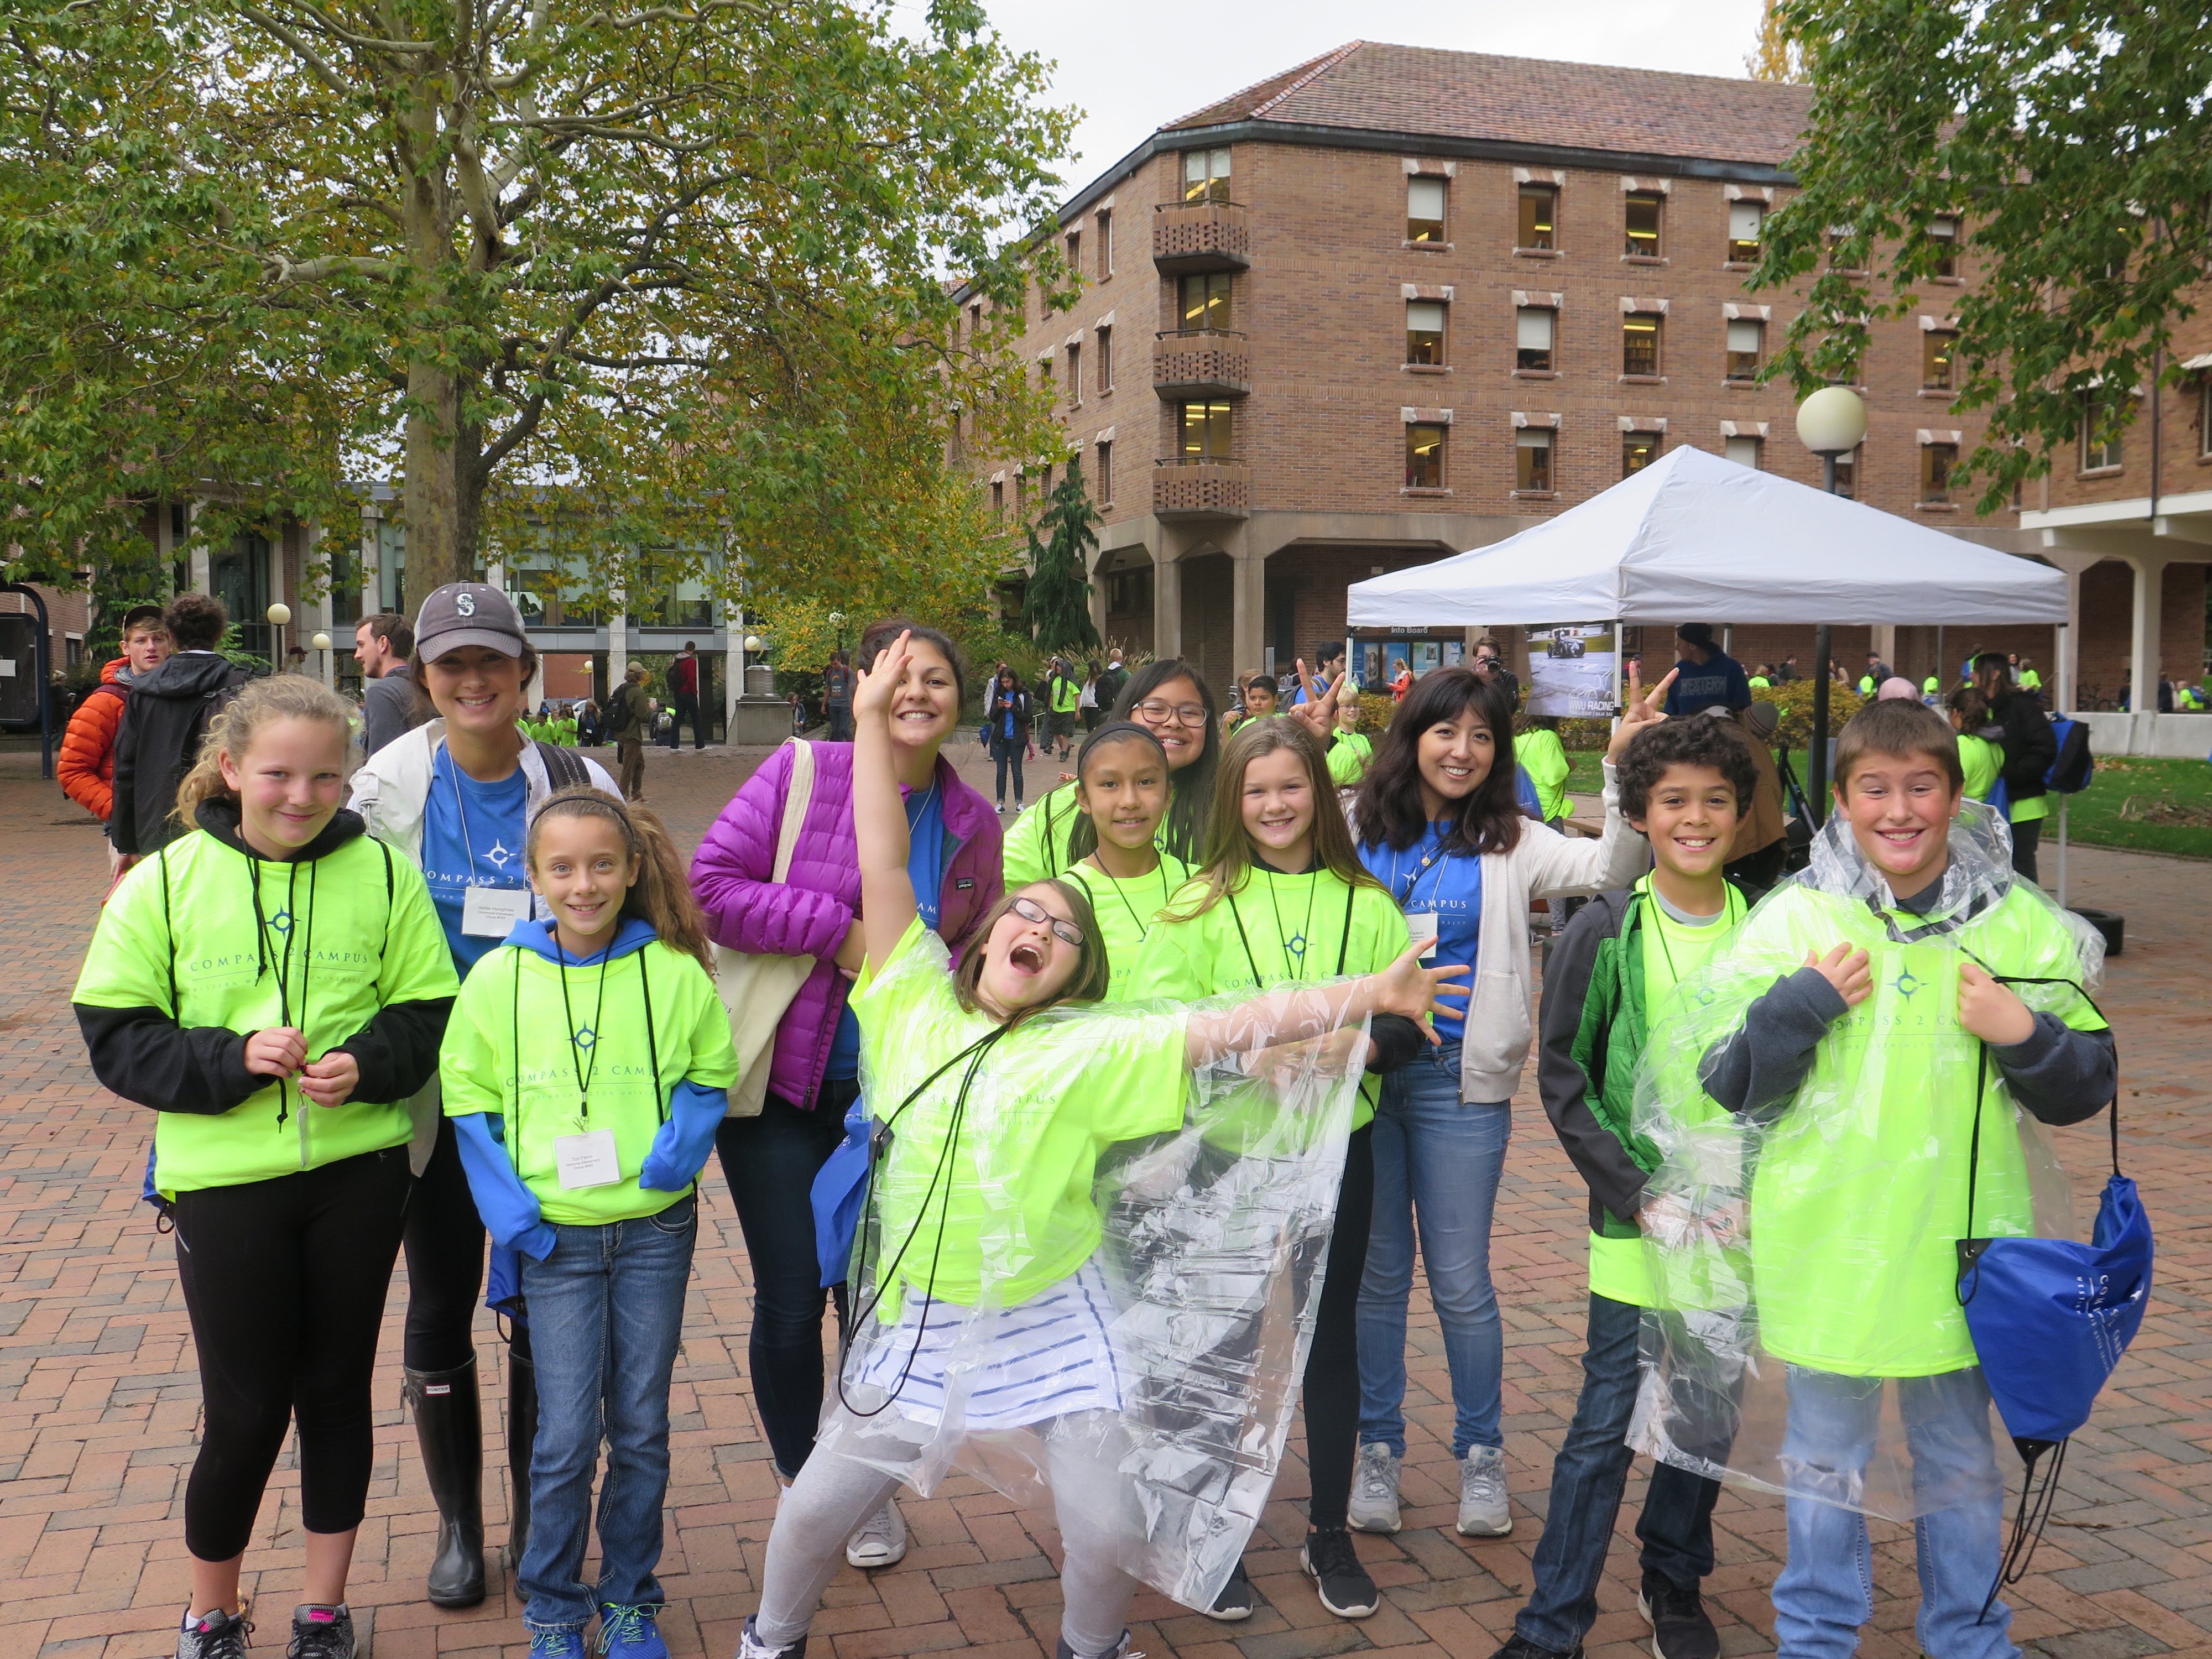 A group of 5th grade students in lime green shirts, and college mentors smile and pose in Red Square during WWU Tour Day